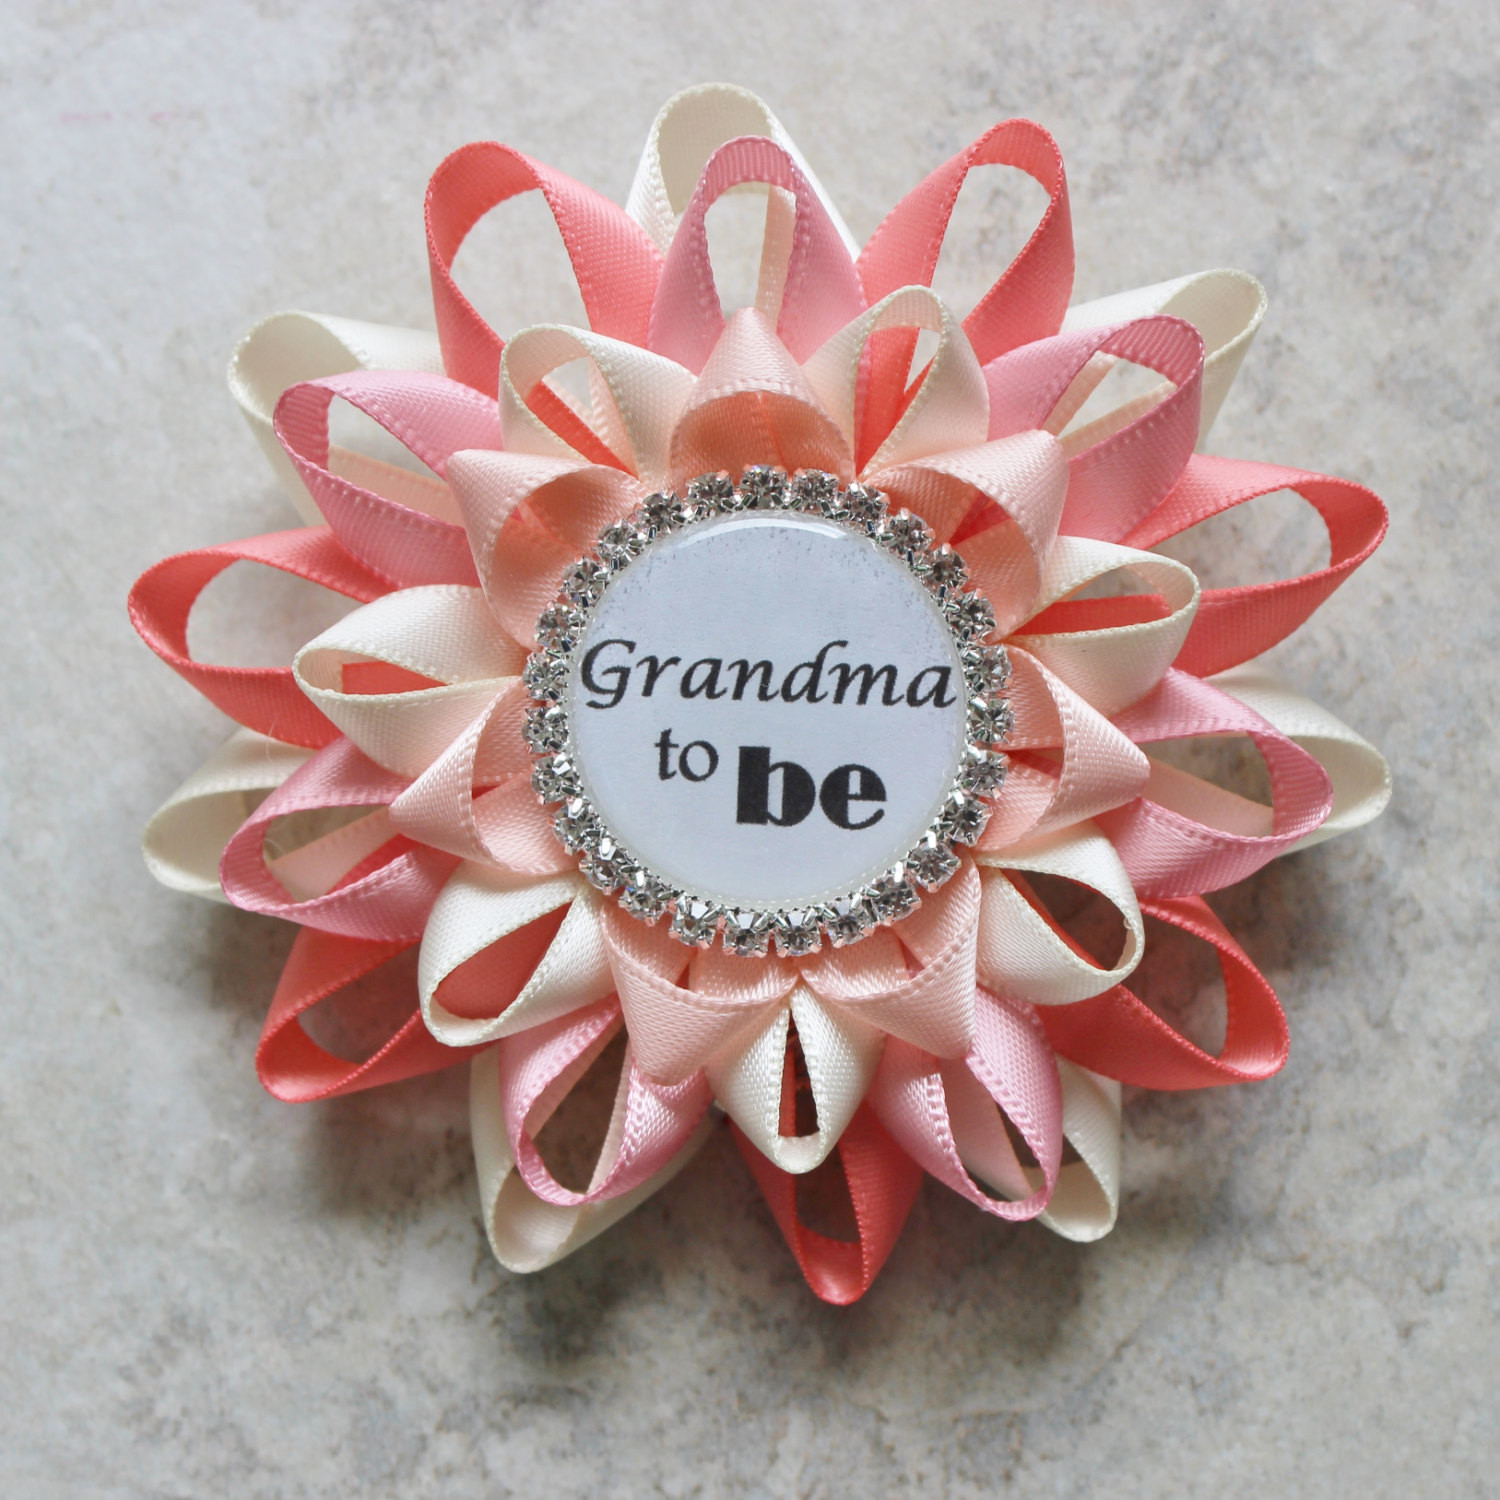 Grandma Baby Shower Gift Ideas
 Grandma to Be Pin Personalized Baby Shower Corsage New